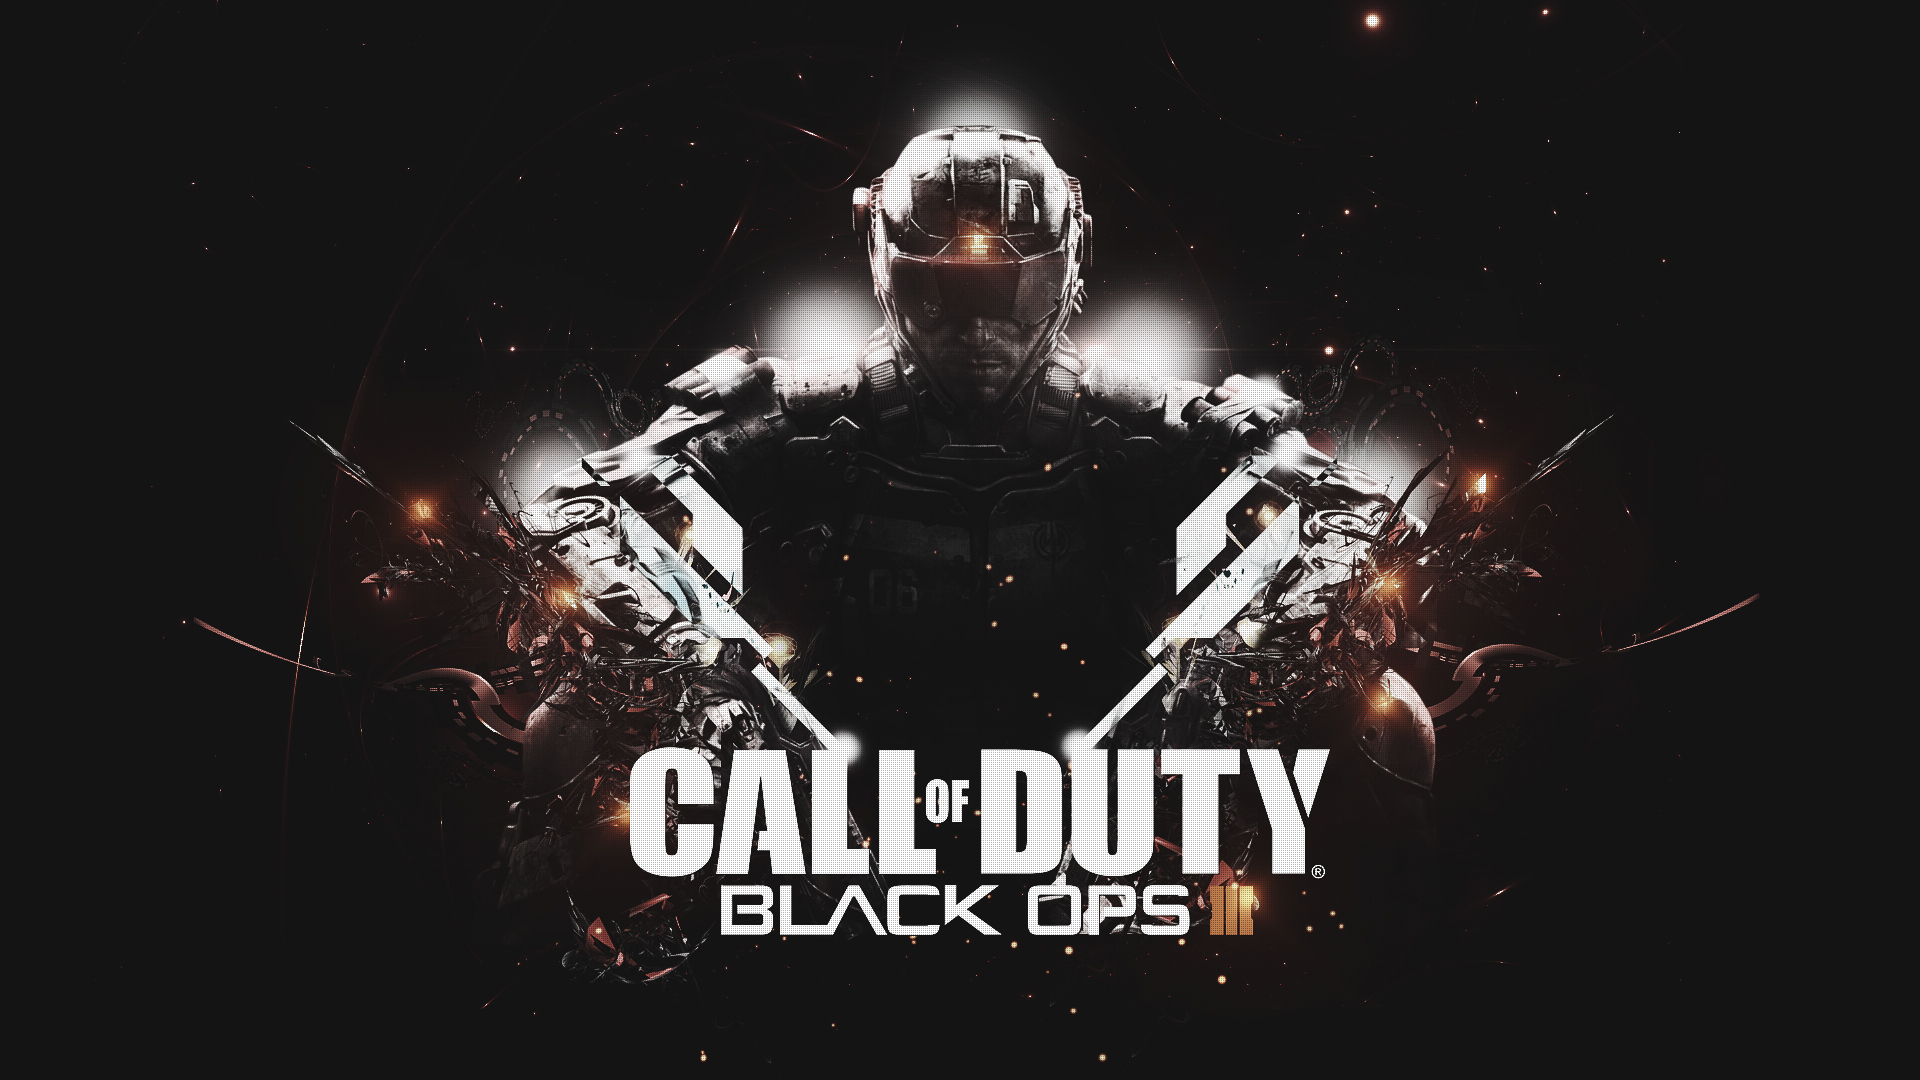 Call of duty warzone mobile на телефон. Call of Duty. Call of Duty обои. Call of Duty: Black ops III. Call of Duty Warzone Black ops.